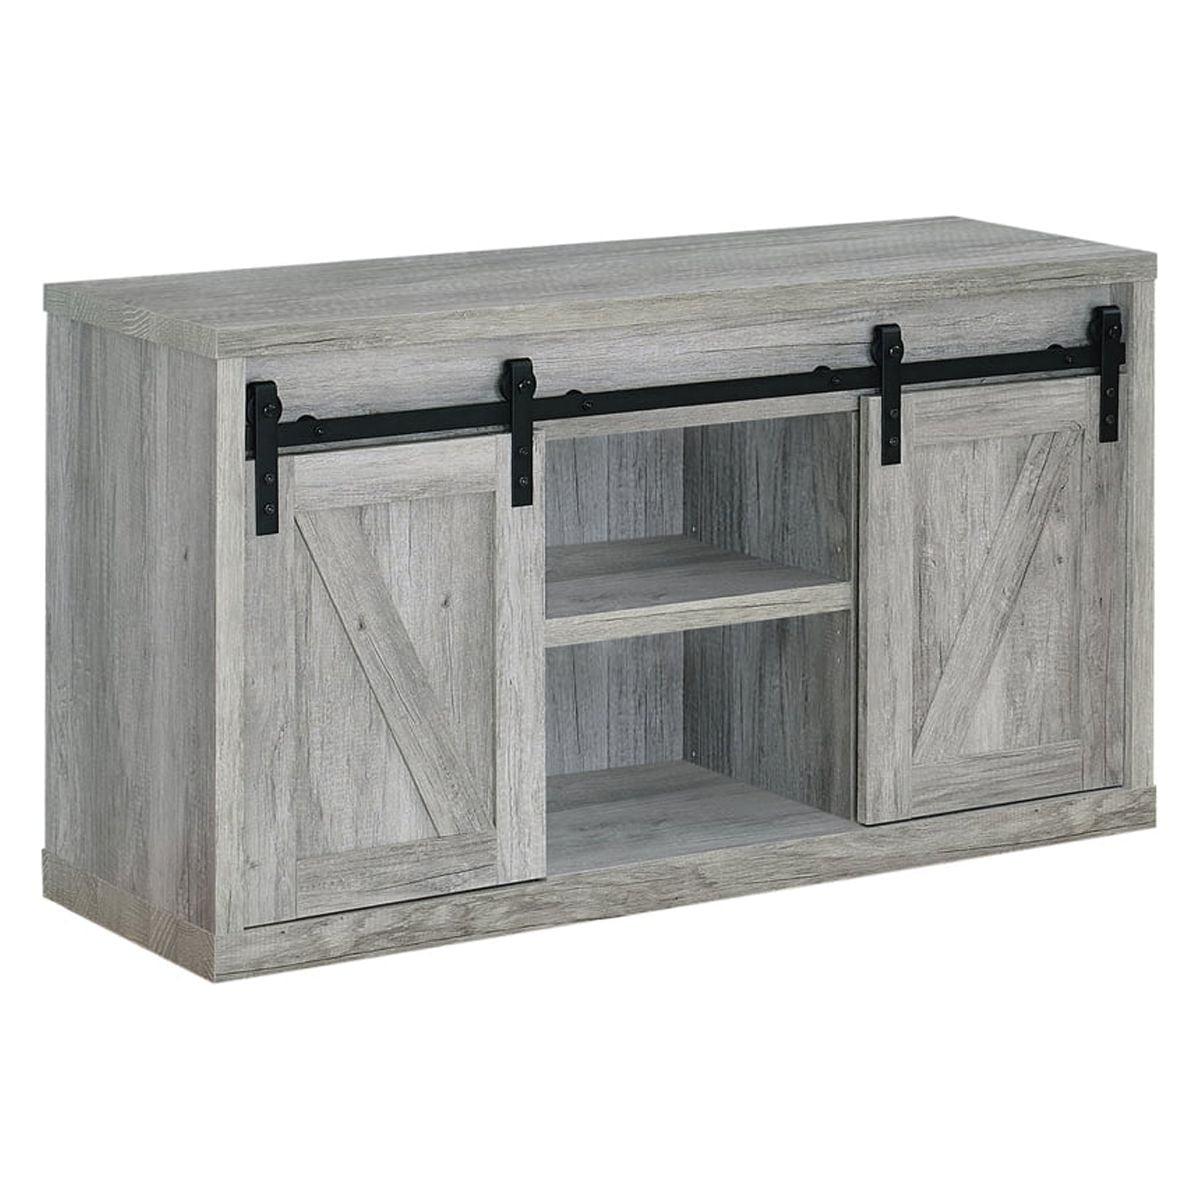 Rustic Farmhouse 48" TV Console with Sliding Barn Doors in Gray